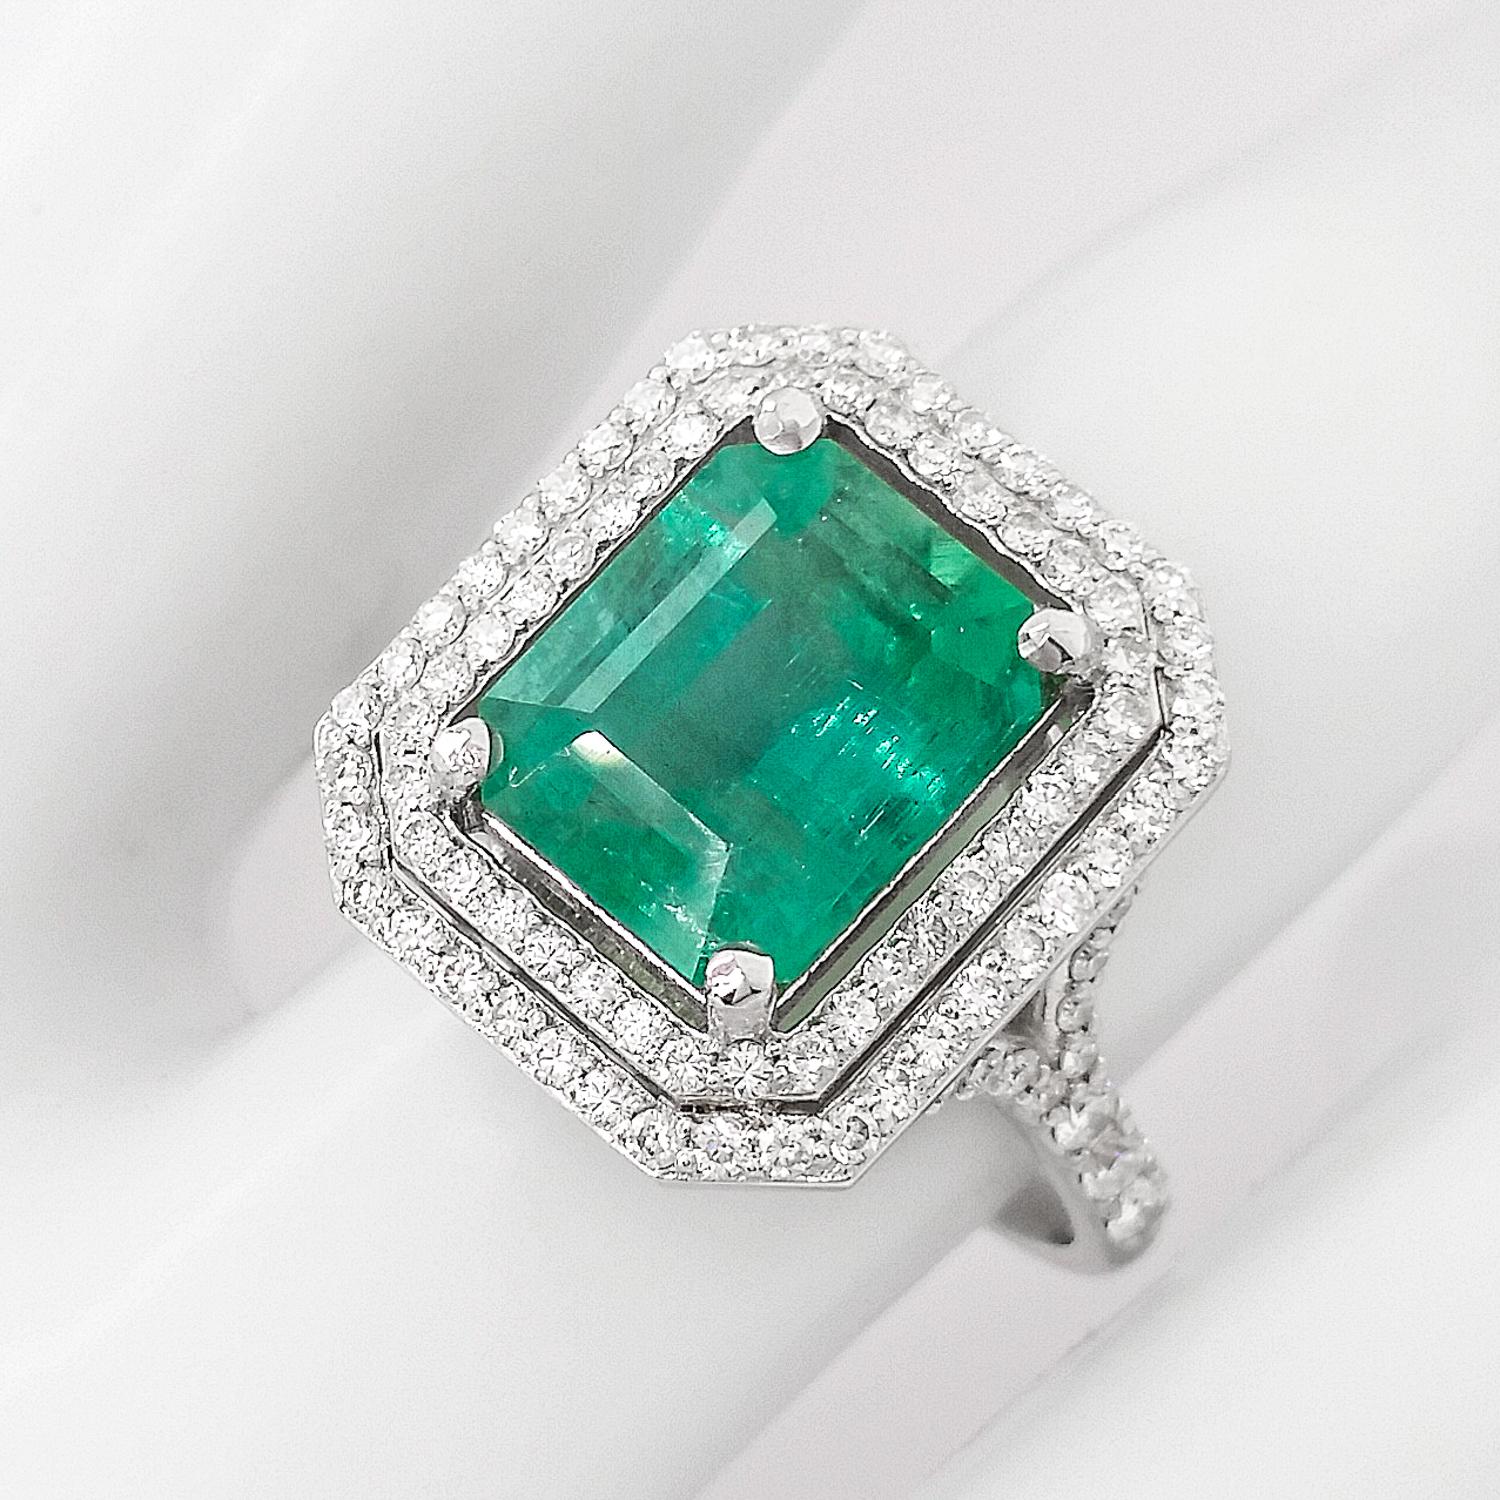 Two rows of 98 endlessly sparkling round brilliant diamonds, totaling 0.70 carats, harmonically surround the gorgeous bluish-green natural green emerald weighing 3.24 carats, and all set in 14kt white gold. This amazing ring has a unique design and